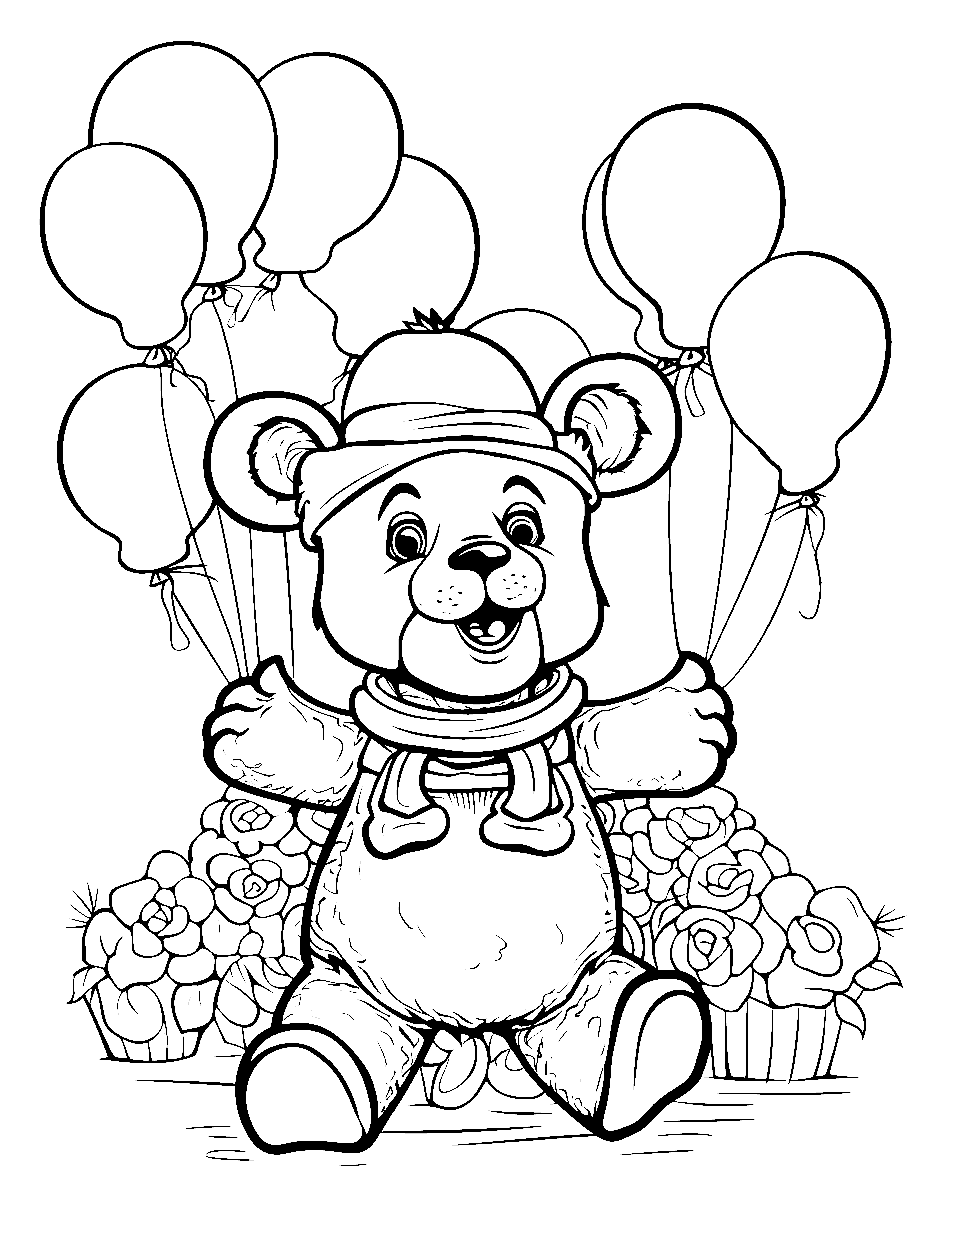 Freddy Bear’s Balloon Party Five Nights at Freddys Coloring Page - Freddy Dressed as a normal bear surrounded by colorful balloons in a playful environment.